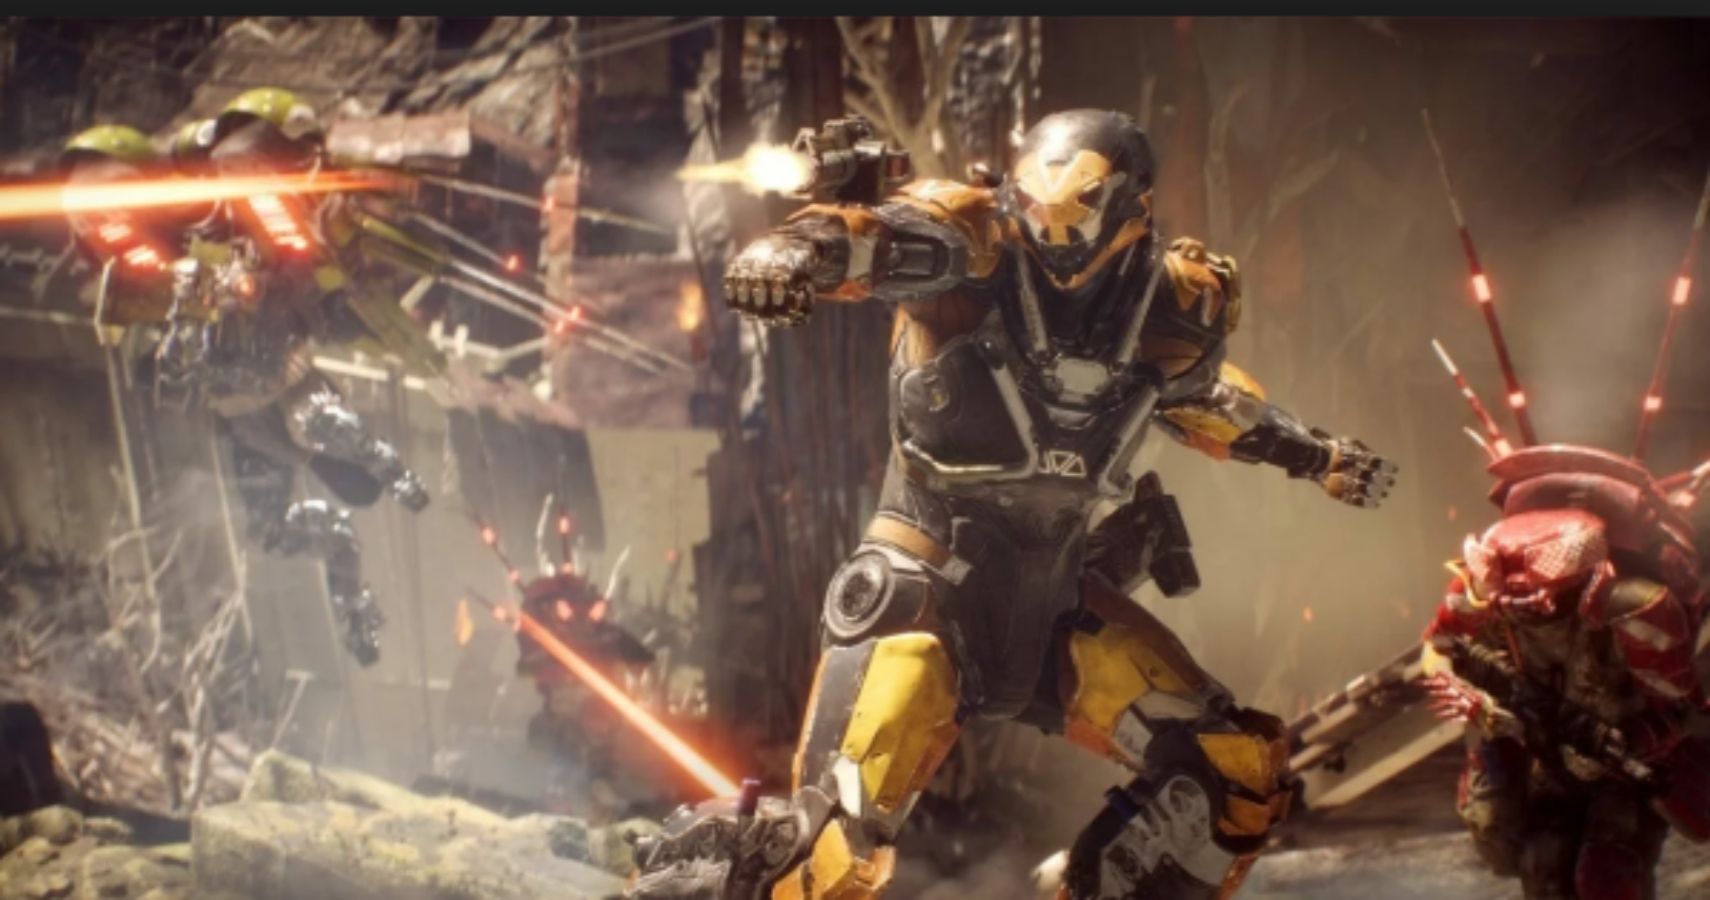 BioWare Clarifies That Anthem Vanity Chests Won’t Contain Armor After Mixup